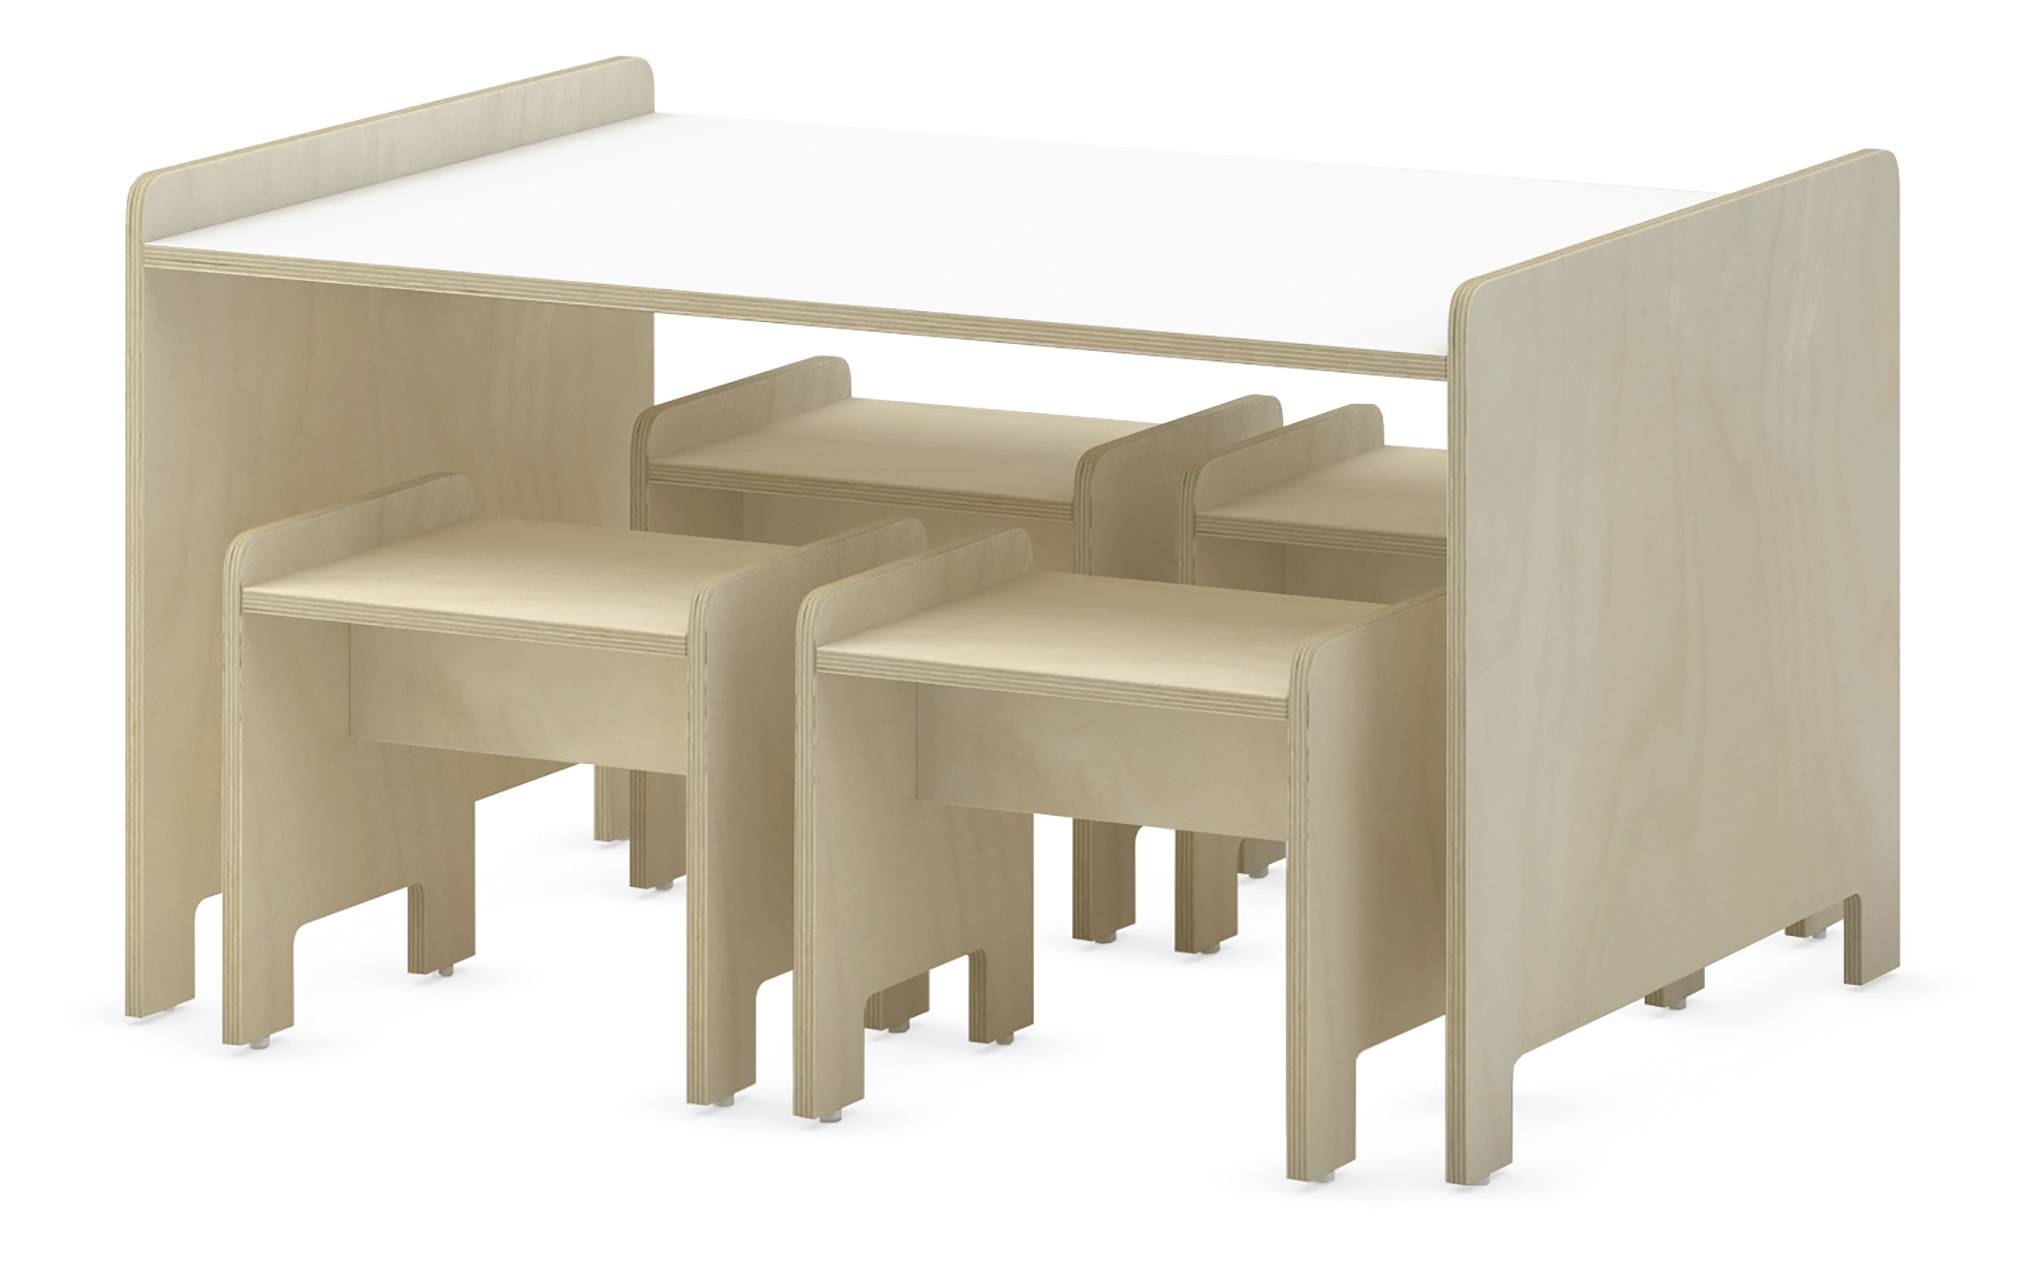 Studio Duc Juno playtable and playstools